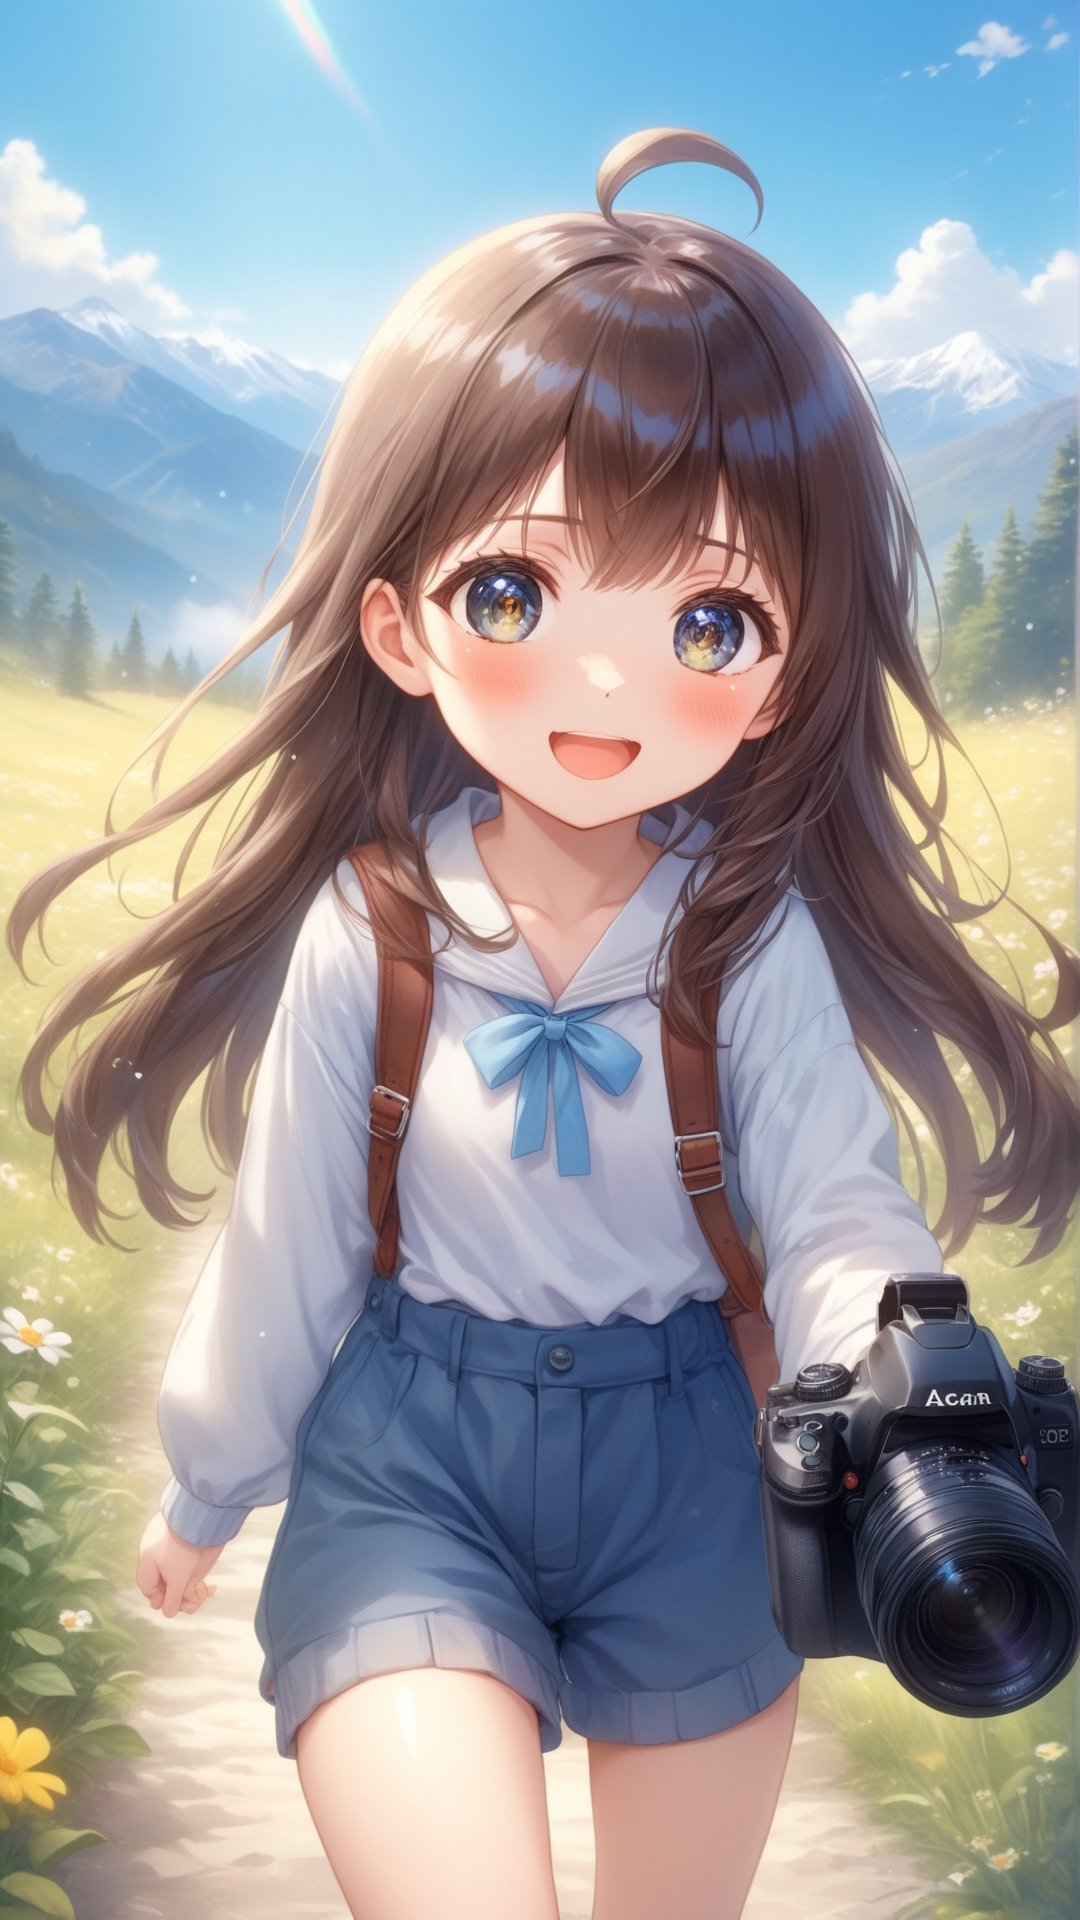 high quality, 8K Ultra HD, highly detailed, masterpiece, A digital illustration of anime style, soft anime tones, Feels like Japanese anime,  Create a digital illustration of a cute kawaii anime-style 20-year-old girl holding a camera and aiming to in the middle of the great outdoors, She is full of energy and enthusiasm, and her bright smile and cheerful expression reflect her passionand love for nature, Her anime-style features include big sparkling eyes, a small nose, and a cute mouth. She has long hair that flows in the breeze and is wearing a casual yet stylish outfit suitable for exploring the wilderness, The background should be a beautiful natural landscape, such as a forest or a mountain range, to emphasize the girl's love of nature and adventure, by yukisakura, The illustration should be highly detailed, ,1 girl,More Detail,ral-chrcrts